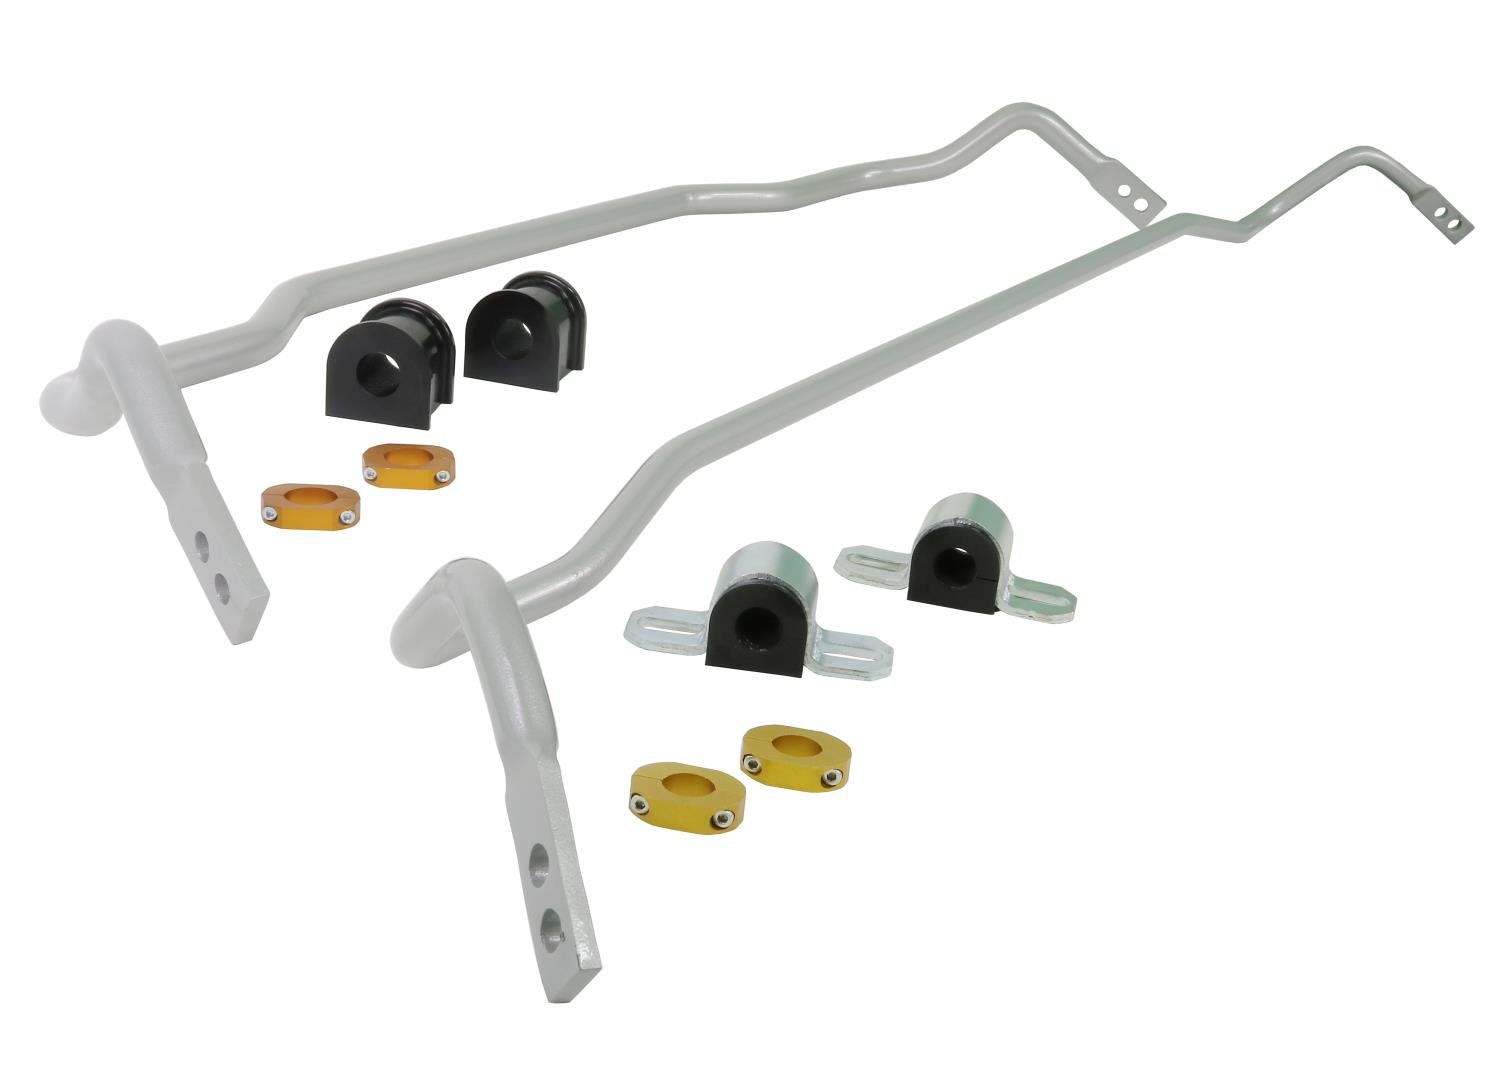 BKK002 Front and Rear Sway Bar Kit for 2018-2019 Kia Stinger (Incl. GT, GT1, GT2, Premium)